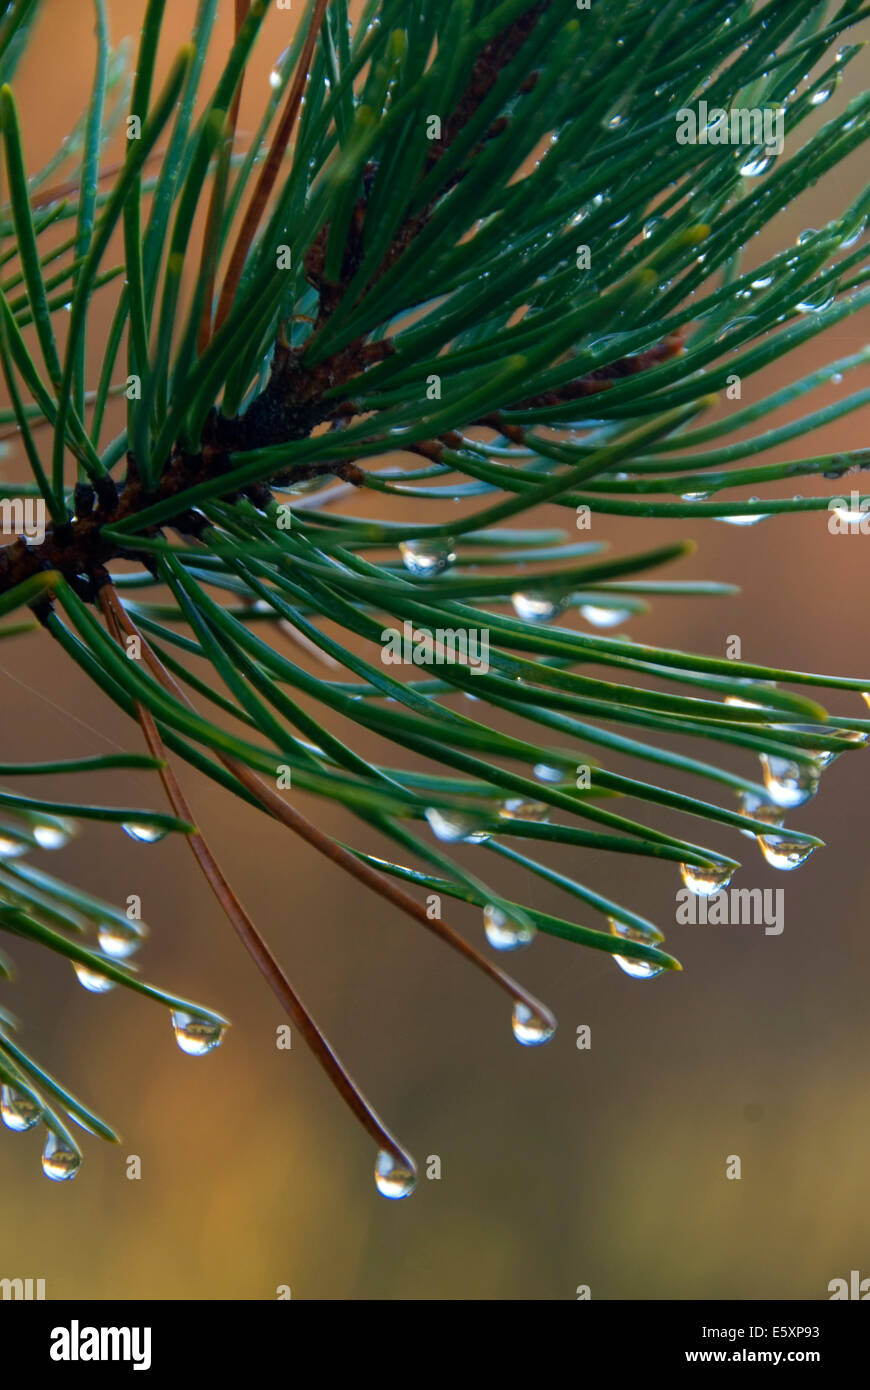 Dew on lodgepole pine (Pinus contorta), Crescent Creek Wild and Scenic River, Deschutes National Forest, Oregon Stock Photo